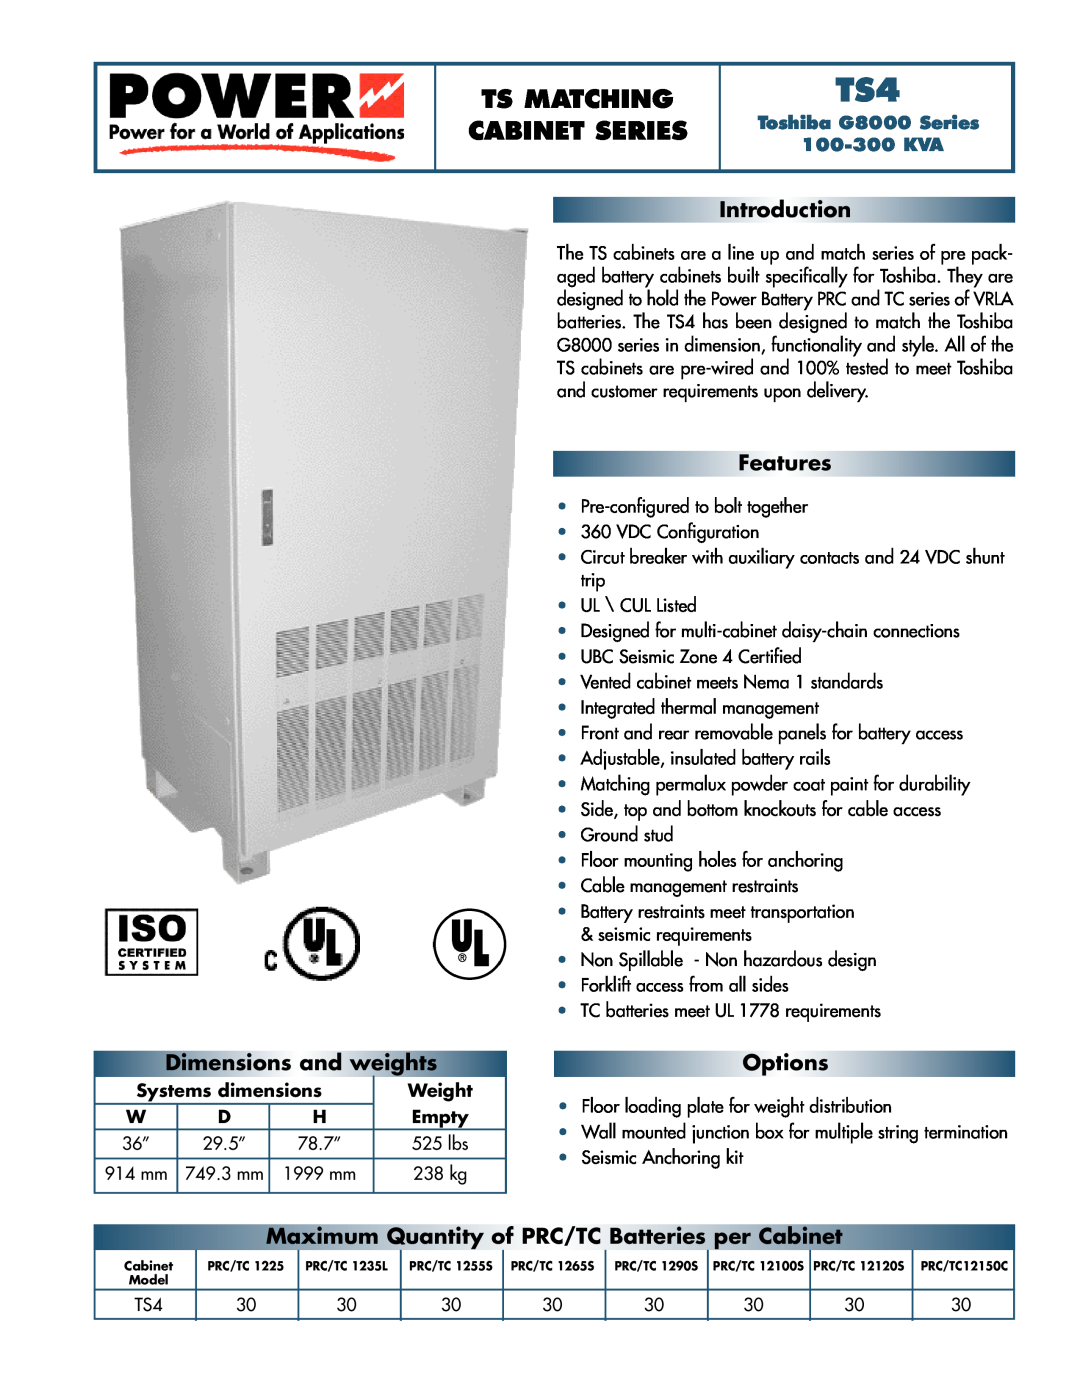 Toshiba TS4 dimensions T S4, Ts Matching, Cabinet Series, Introduction, Features, Dimensions and weights, Options, Weight 